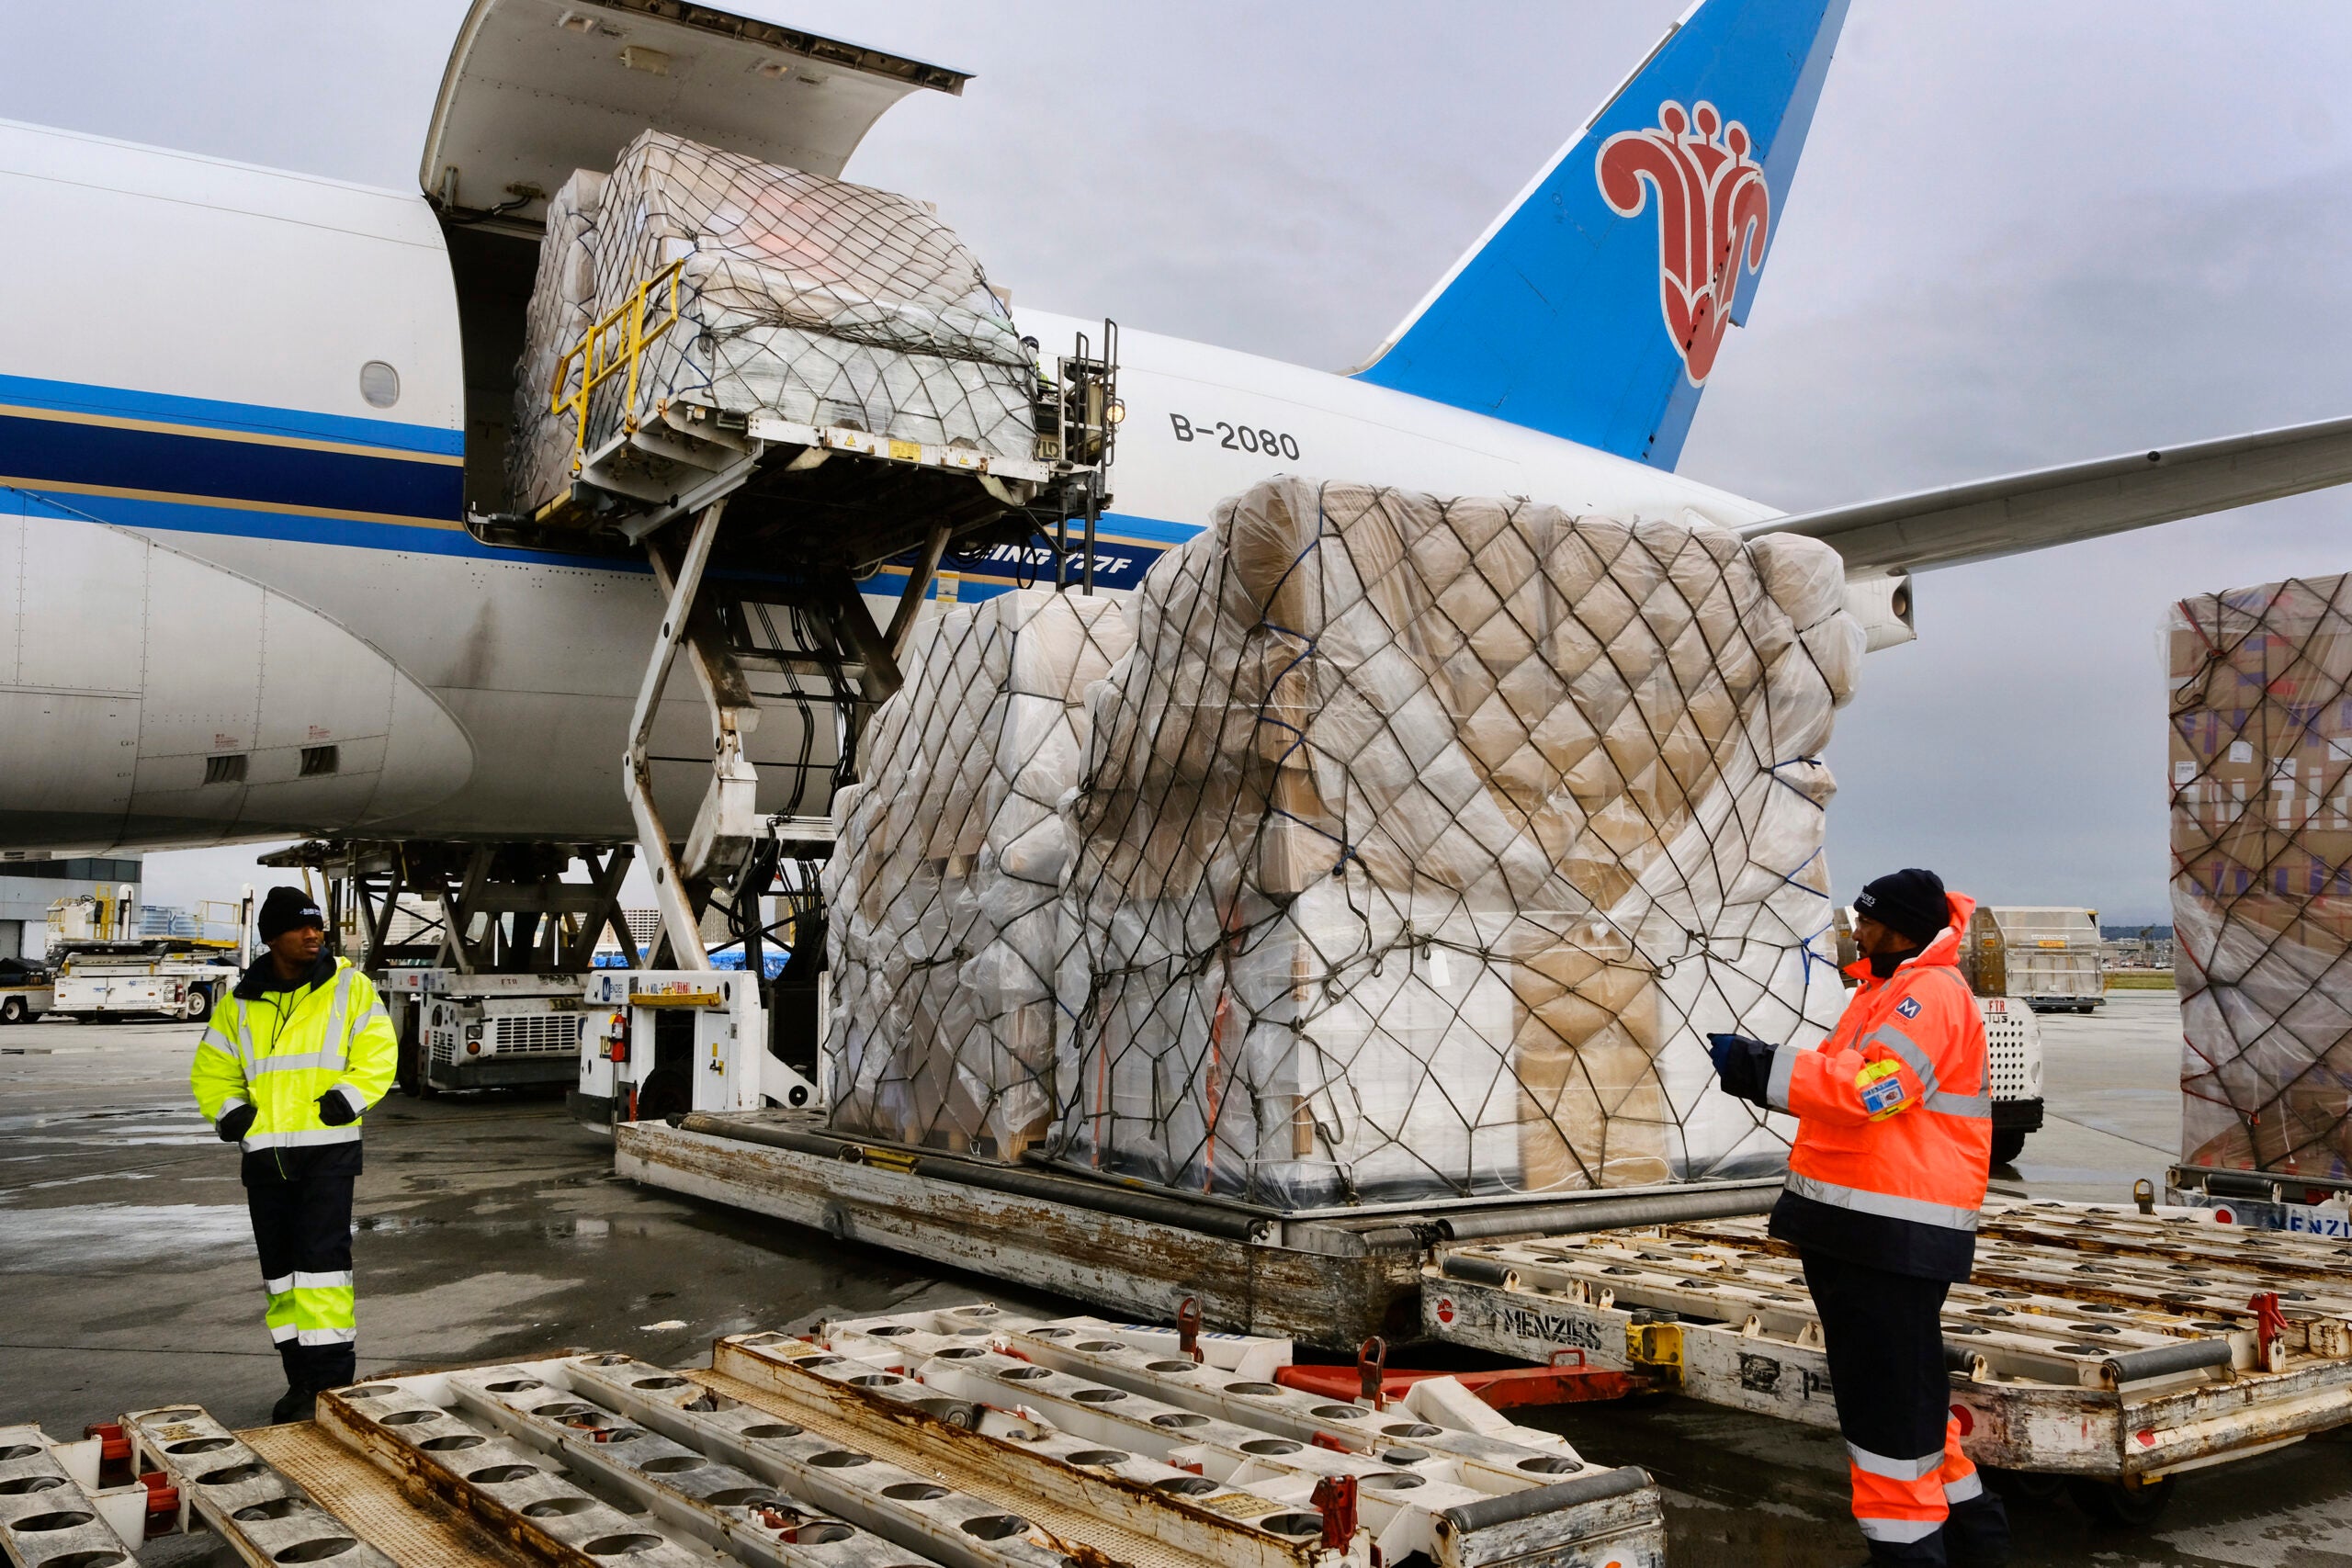 Ground crew at the Los Angeles International airport unload pallets of supplies. 